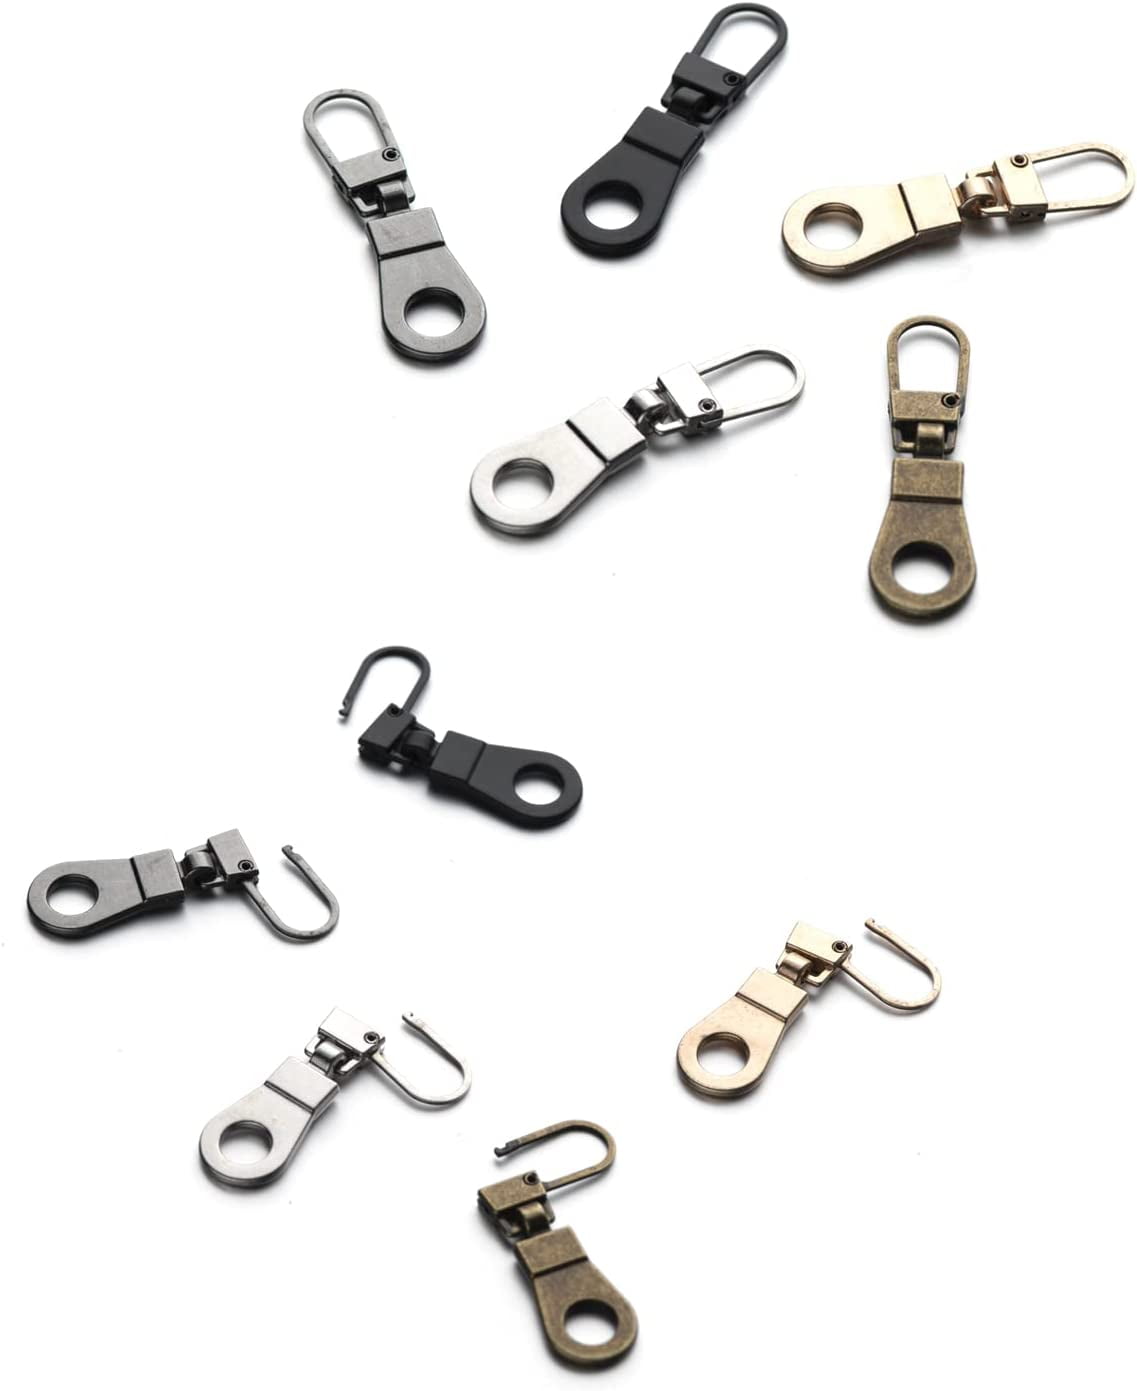 TOPASION Metal Zipper Pull Replacement for Small Holes, Detachable, Repair for Jacket, Bag Boots, Purse, Coat, Pants (5 Pcs Silver)